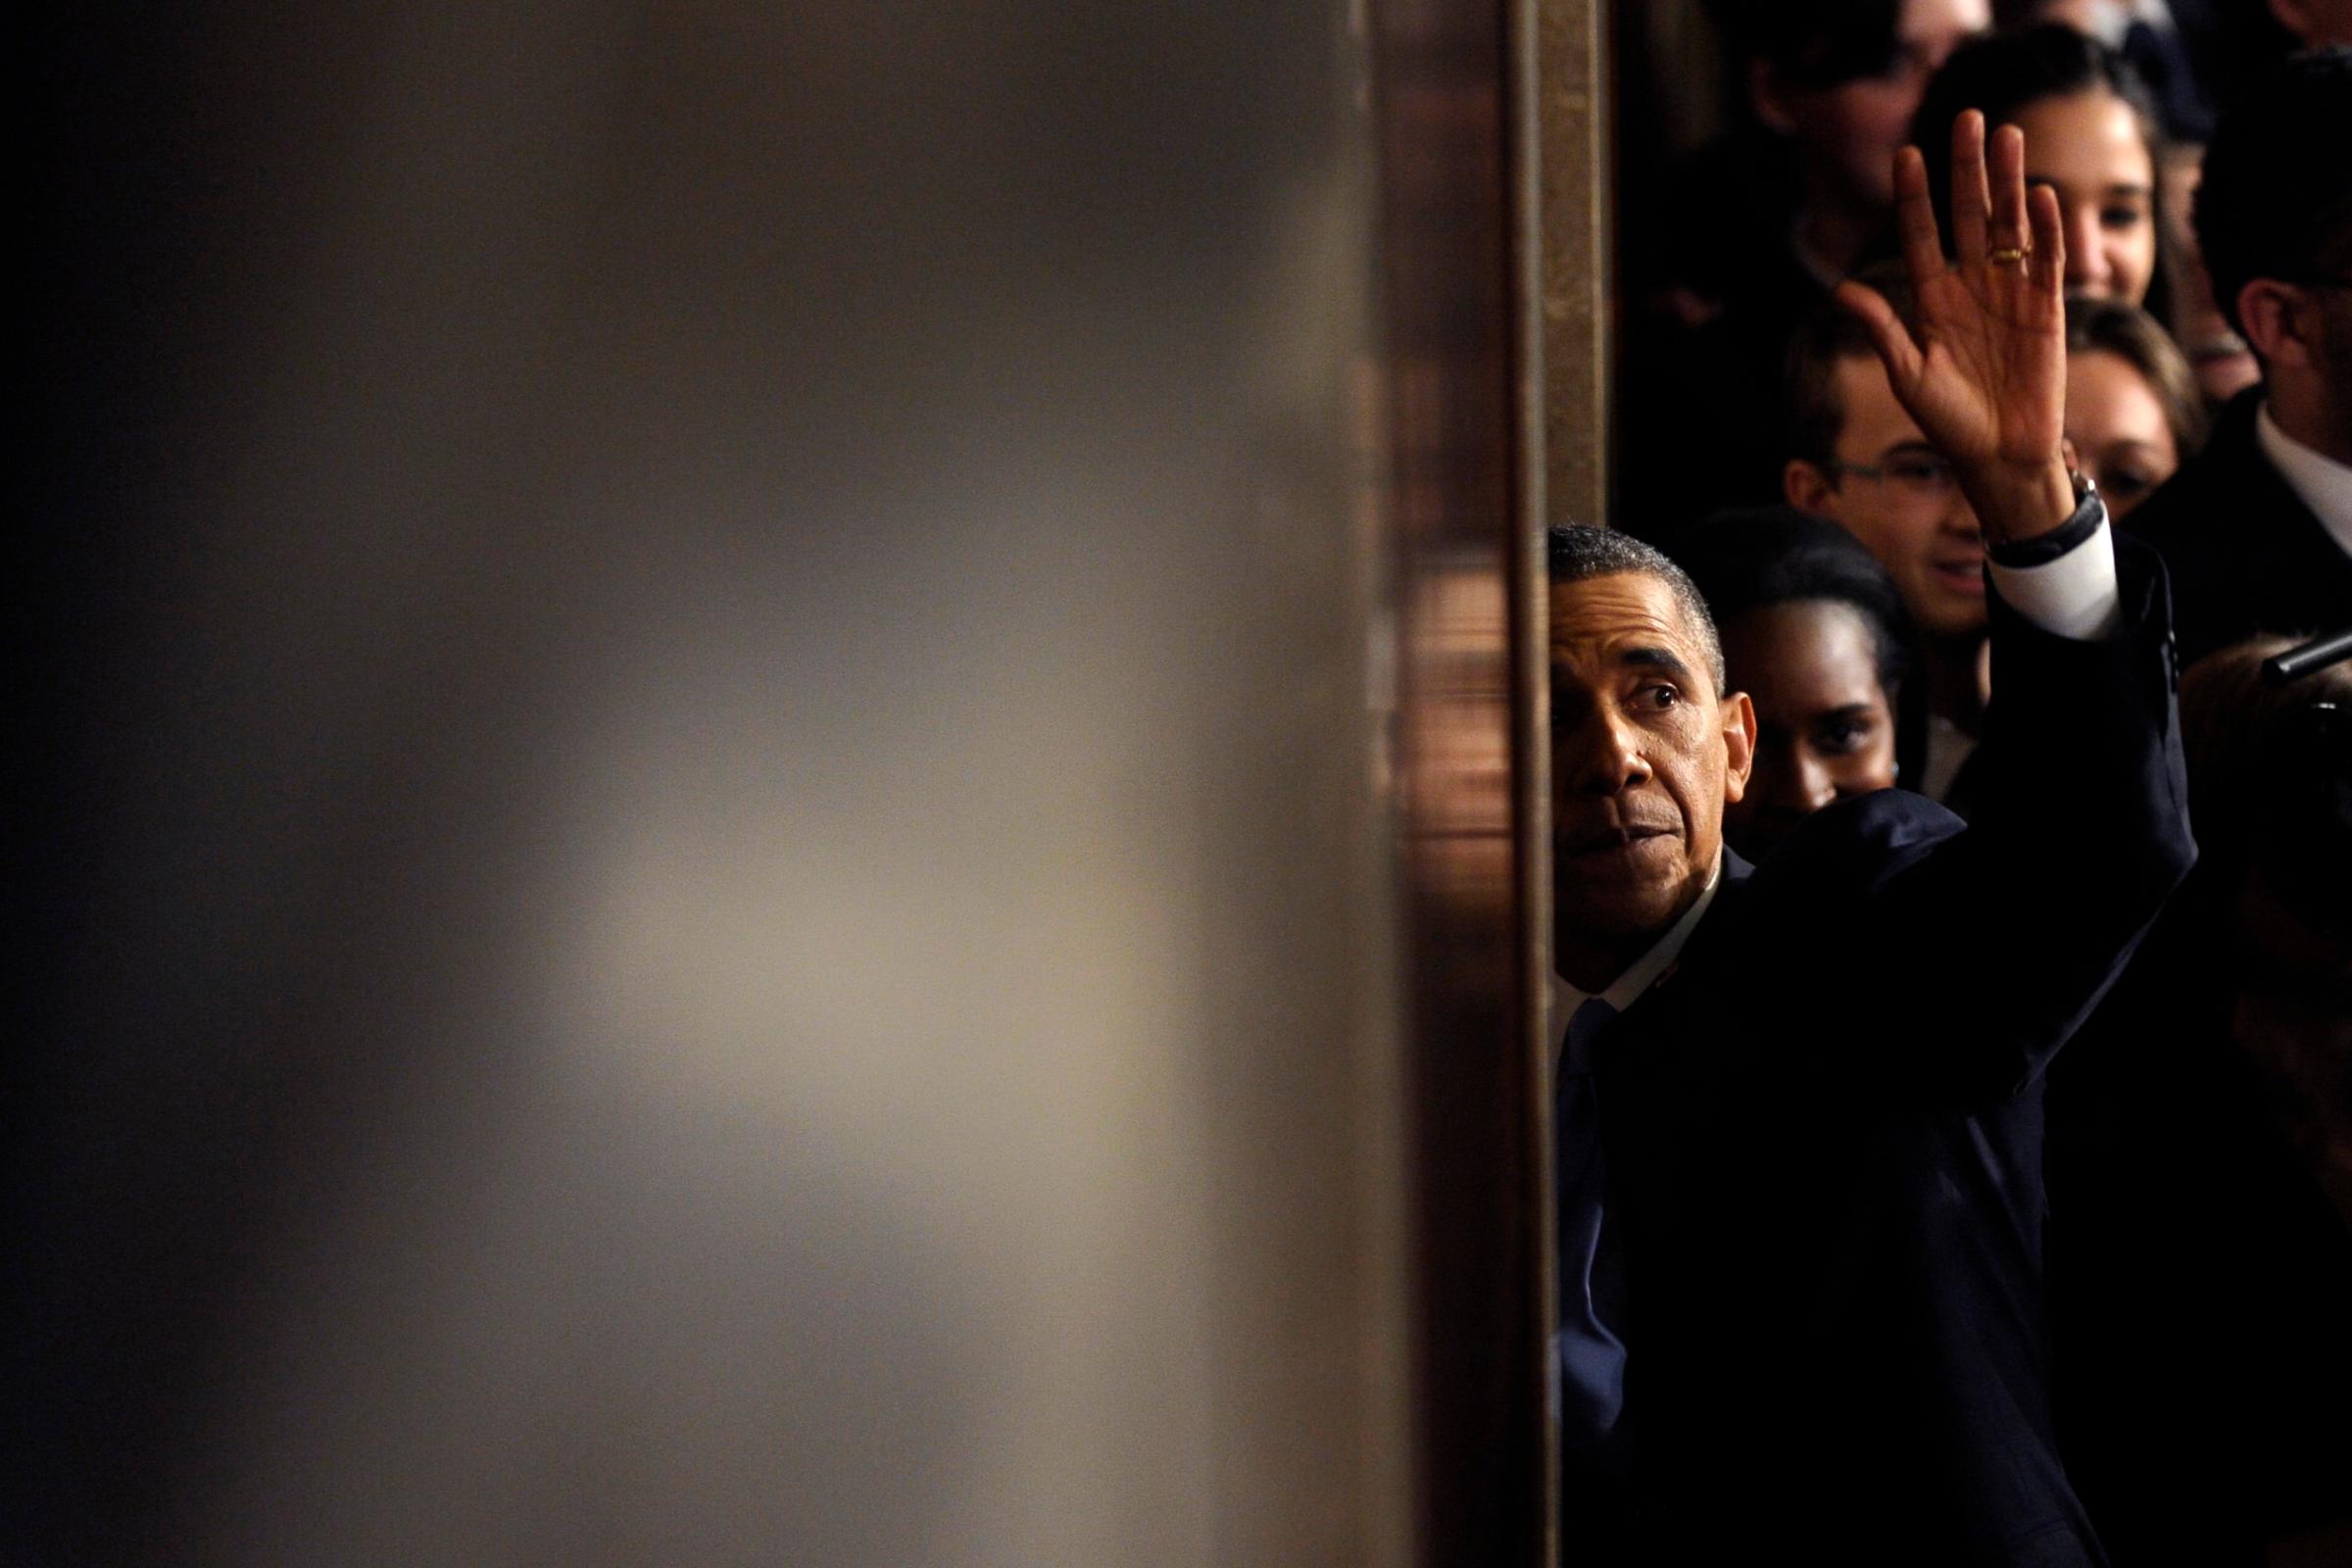 President Barack Obama waves as he walks through a door to leave the House chamber after giving his State of the Union address.